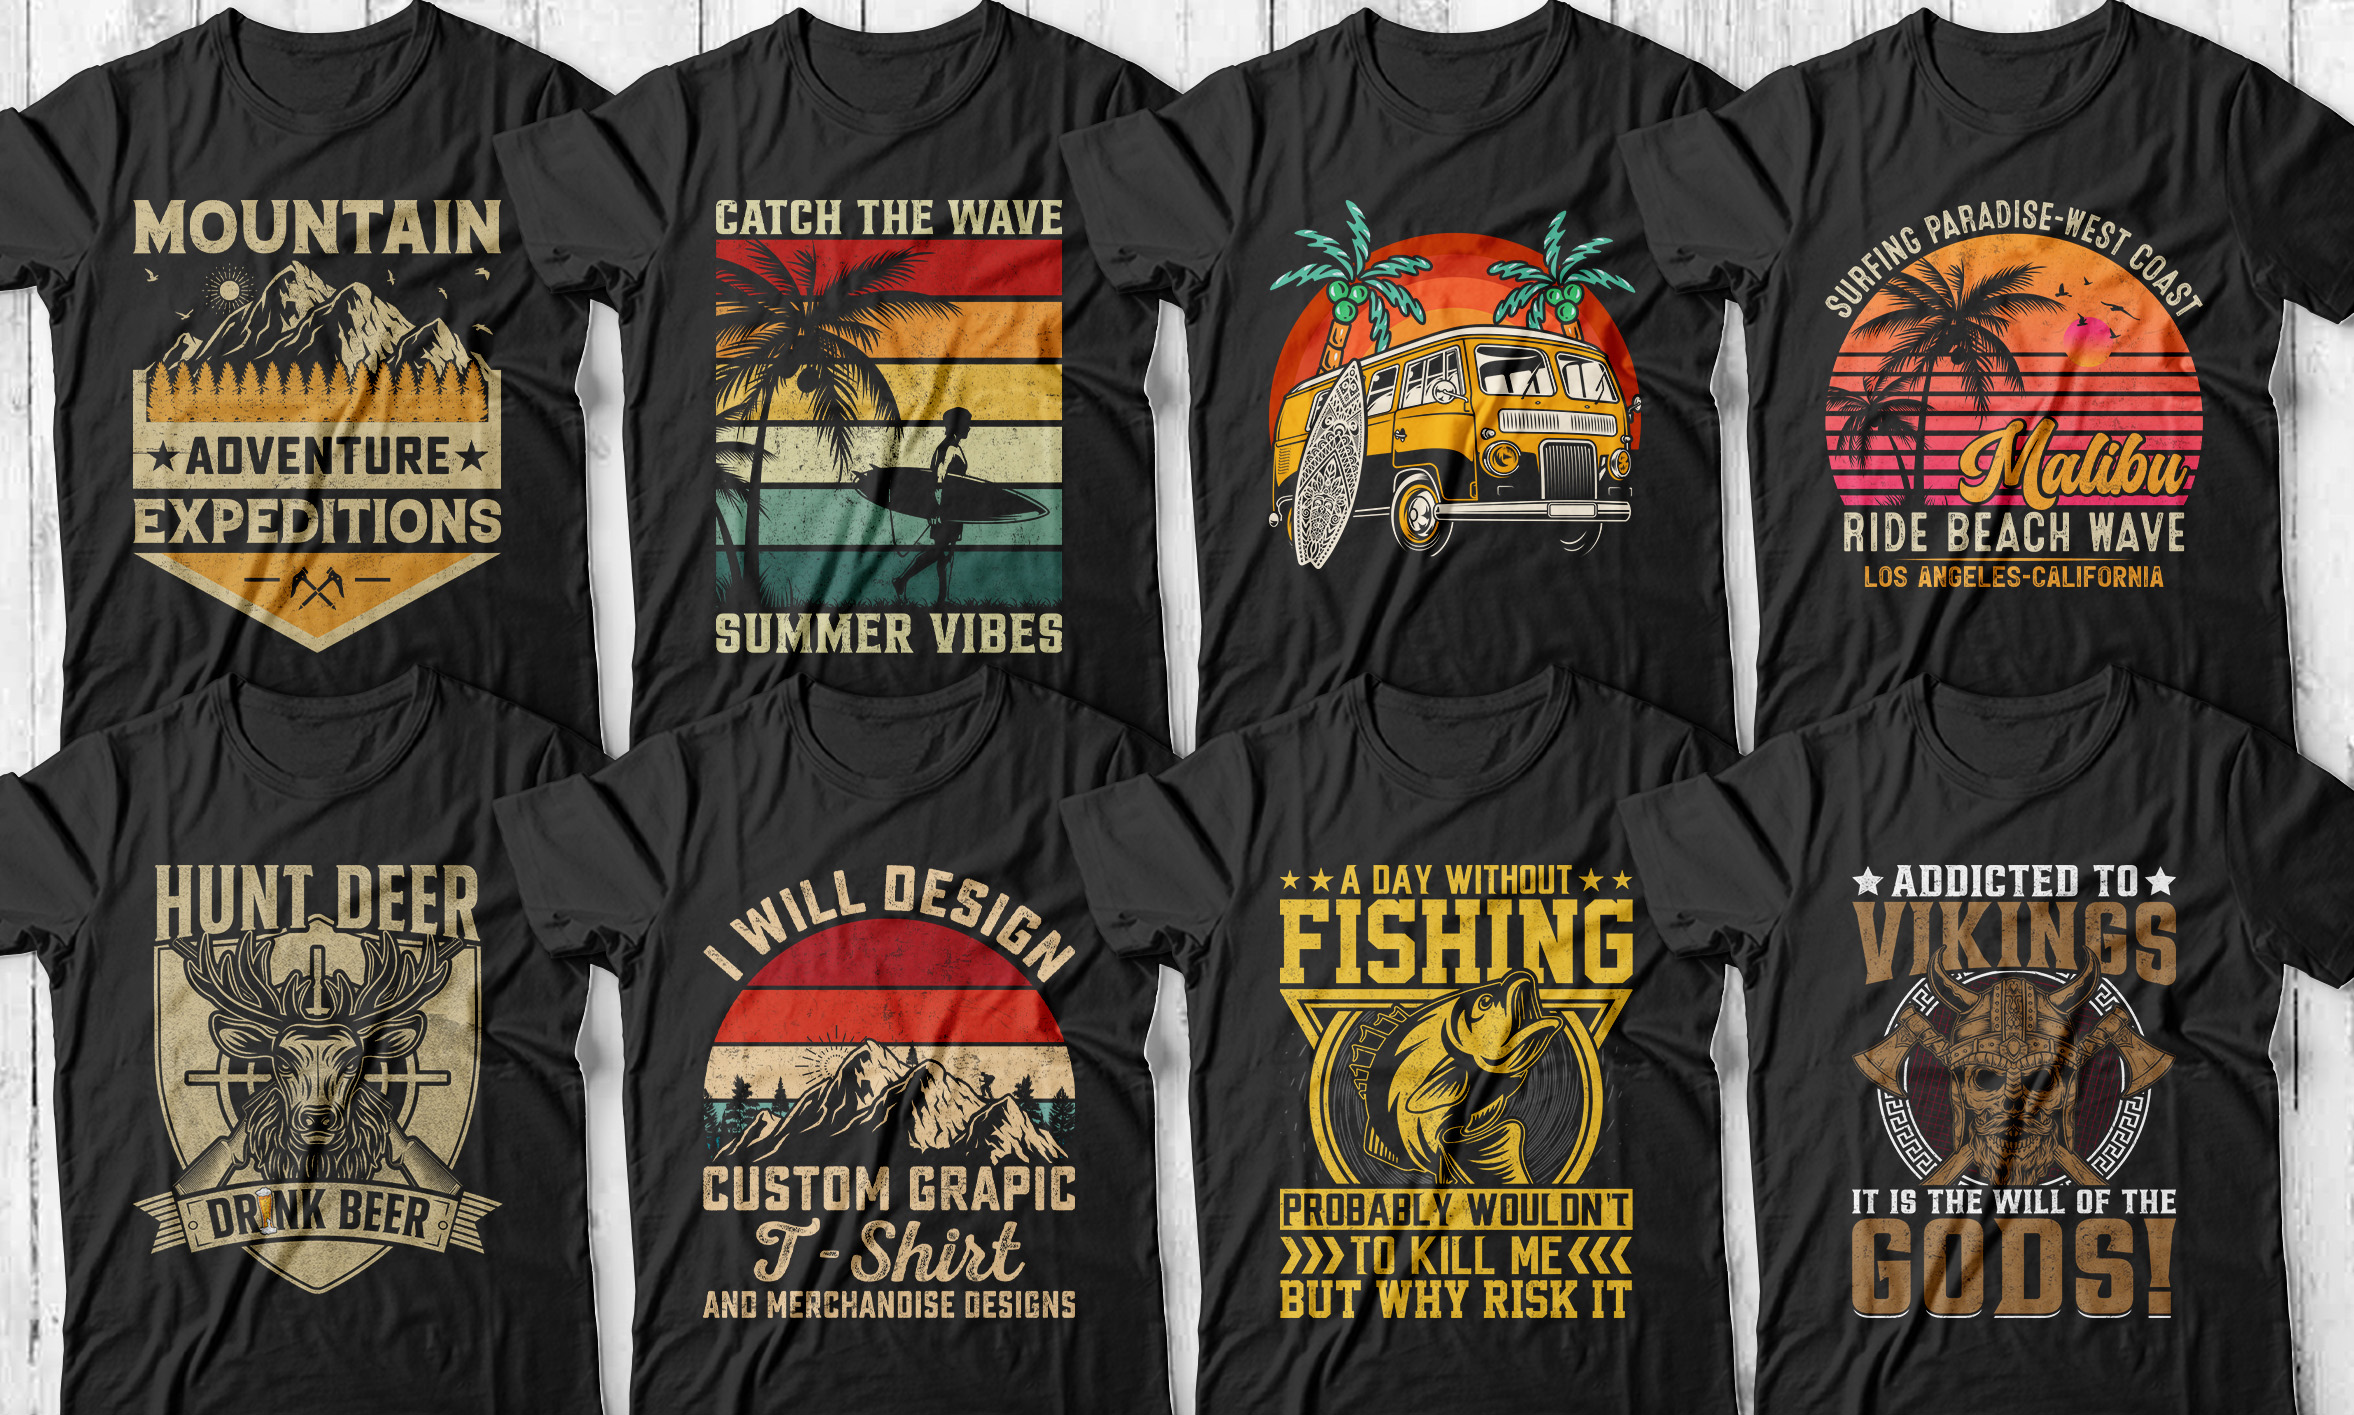 Local artists capture WMNF vibe with T-shirt design contest